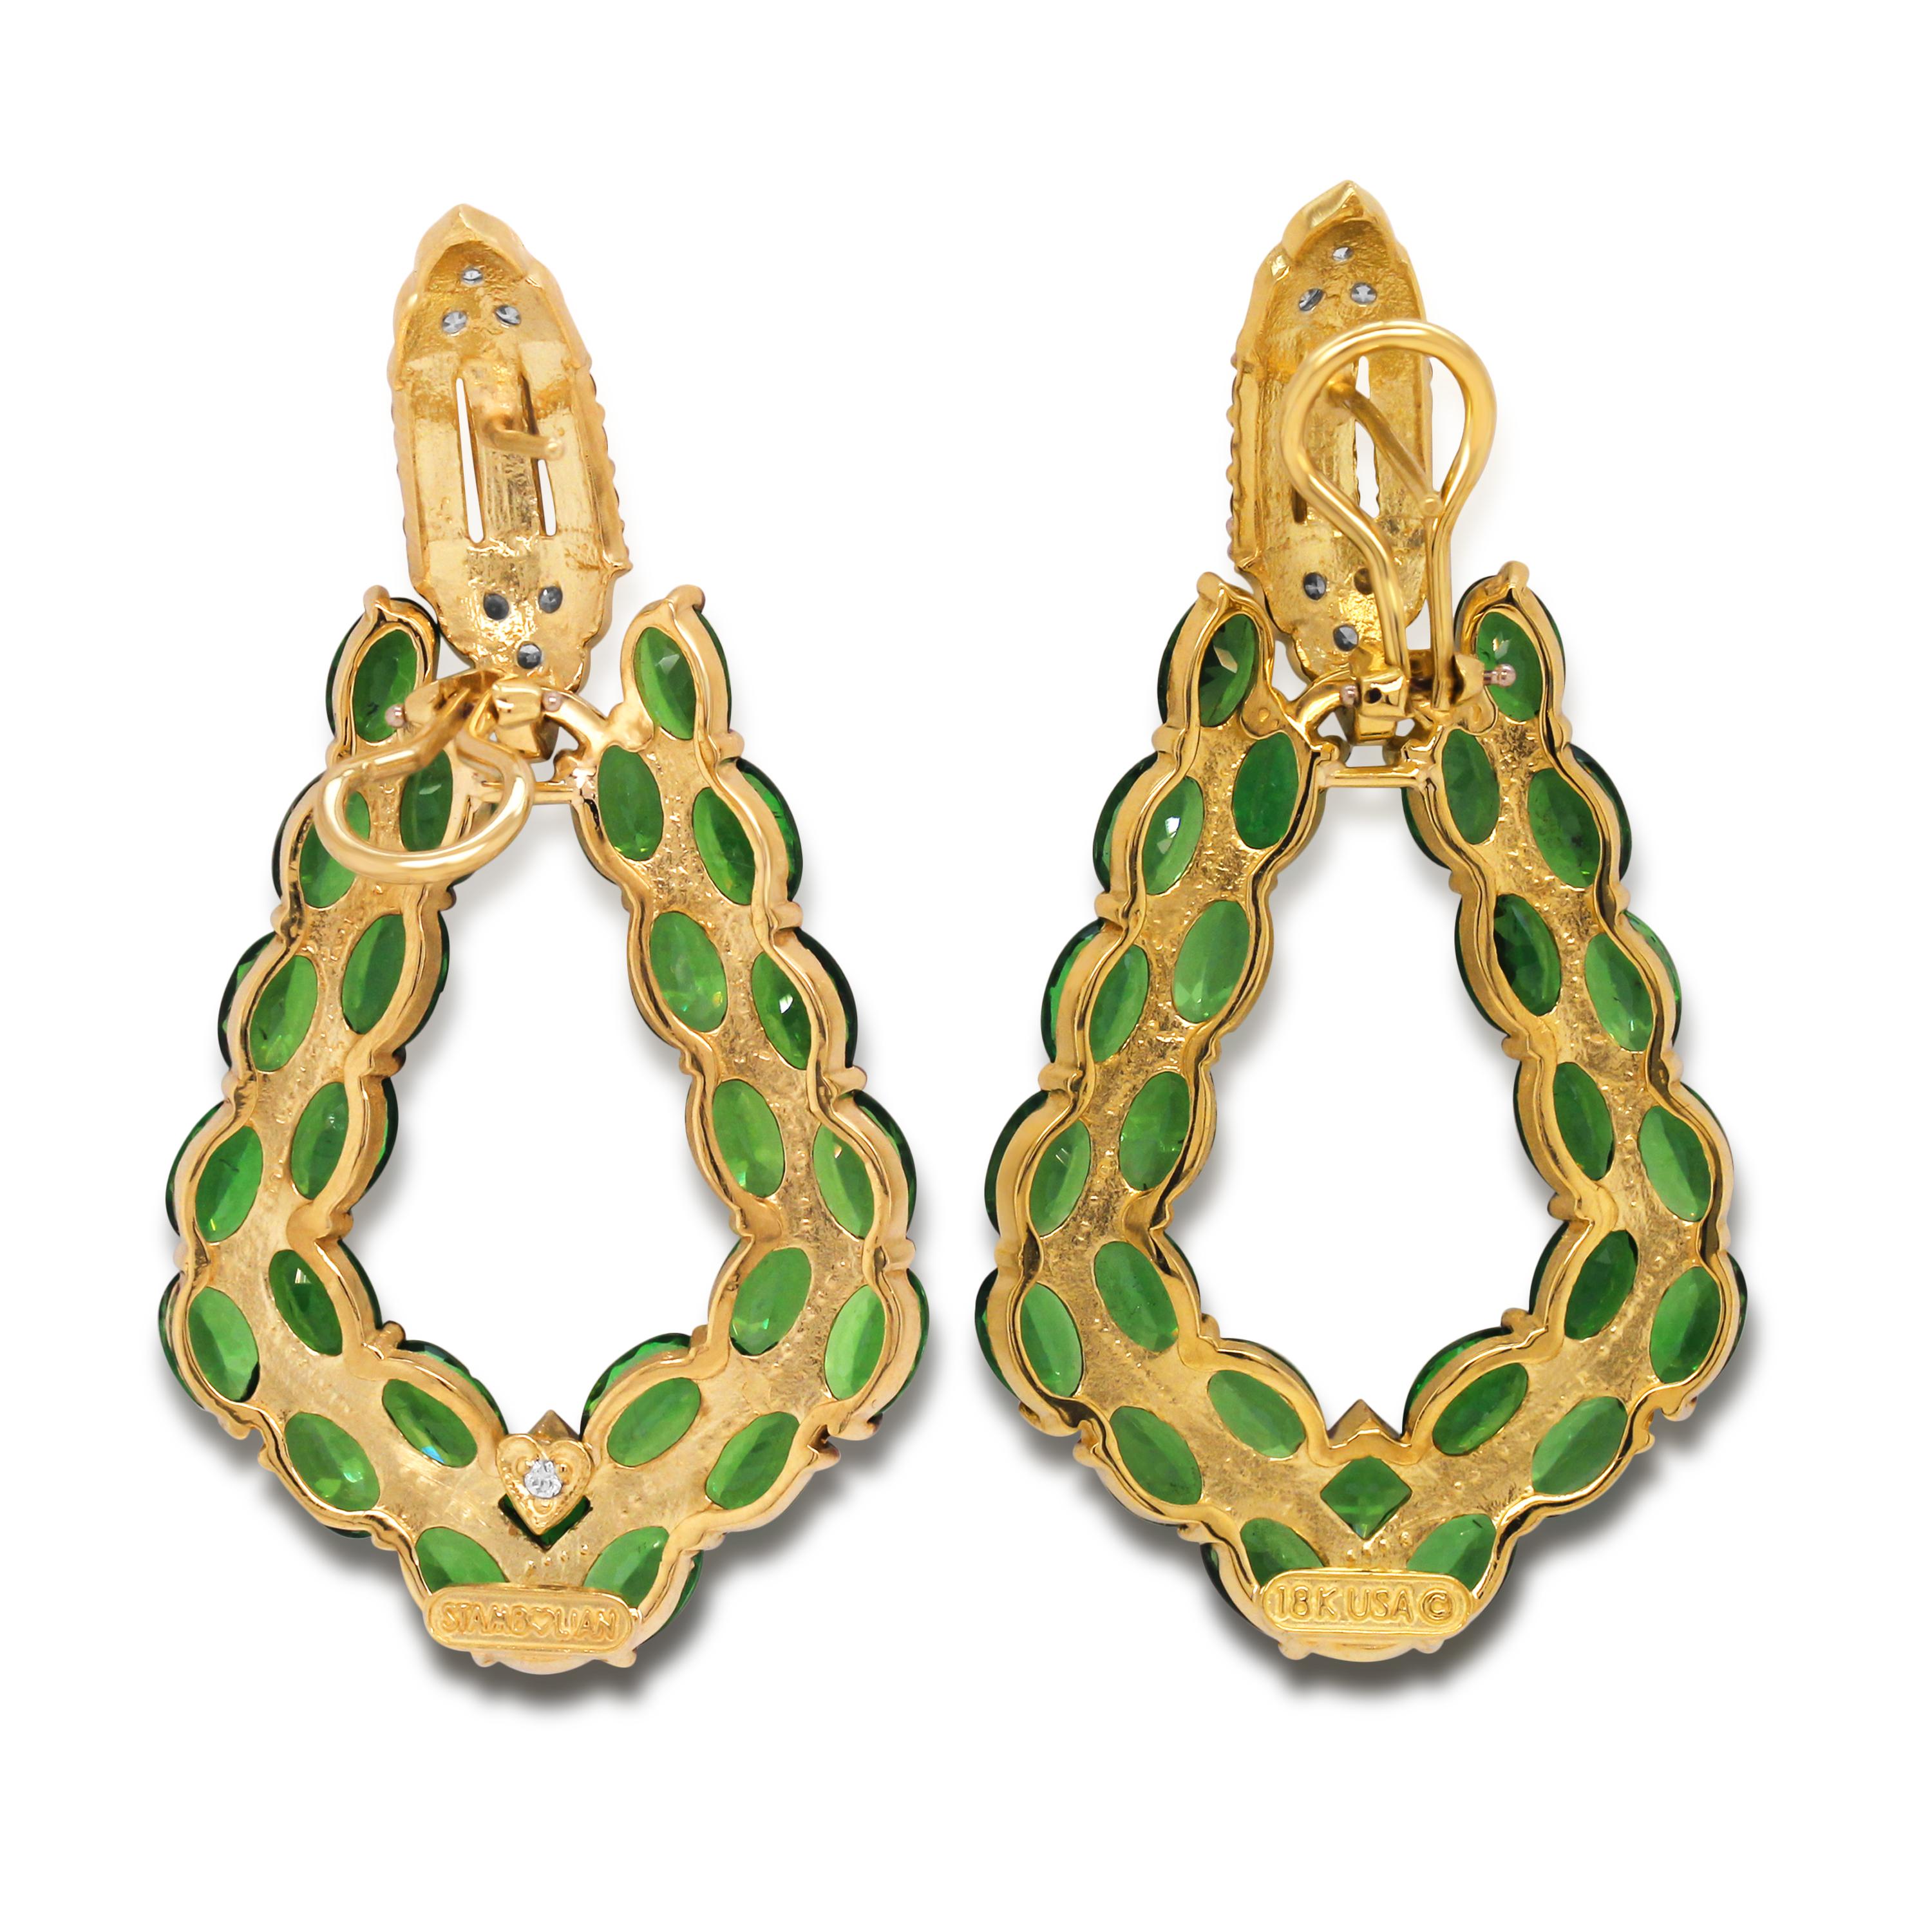 Stambolian 18 Karat Yellow Gold Diamond Tsavorite Drop Dangle Earrings

NO RESERVE PRICE 

This gorgeous pair of earrings feature oval cut Tsavorites with one princess cut Tsavorite each. Top is solid 18k yellow gold and diamonds.

24.70 carat